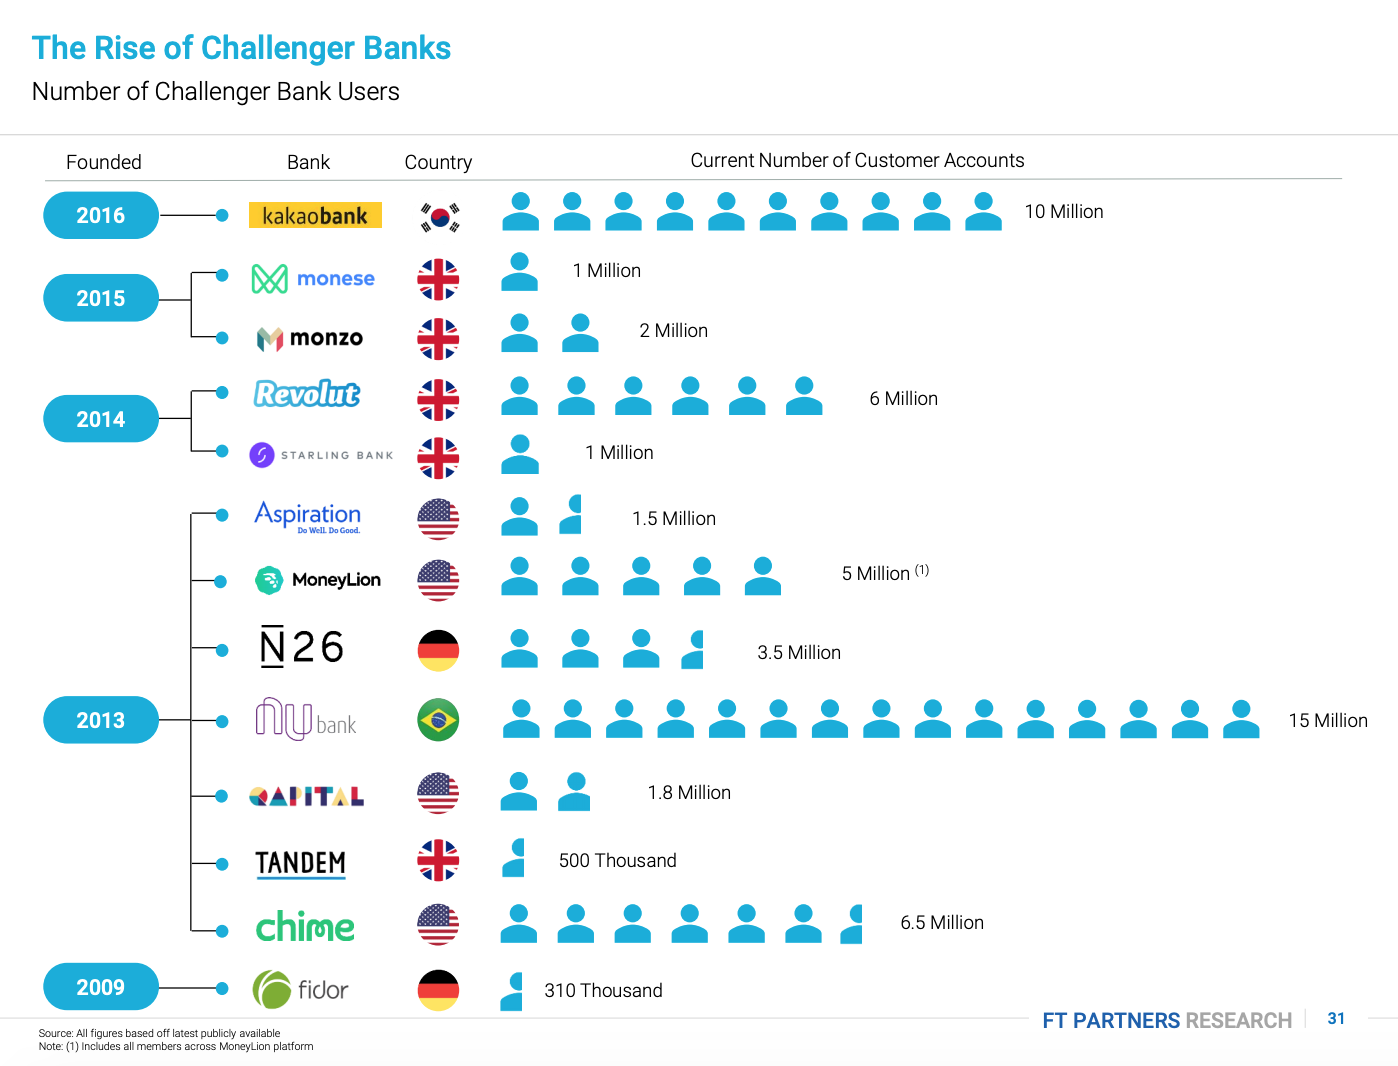 Number of Challenger Bank Users, The Rise of Challenger Banks- Are the Apps Taking Over?, FT Partners, January 2020